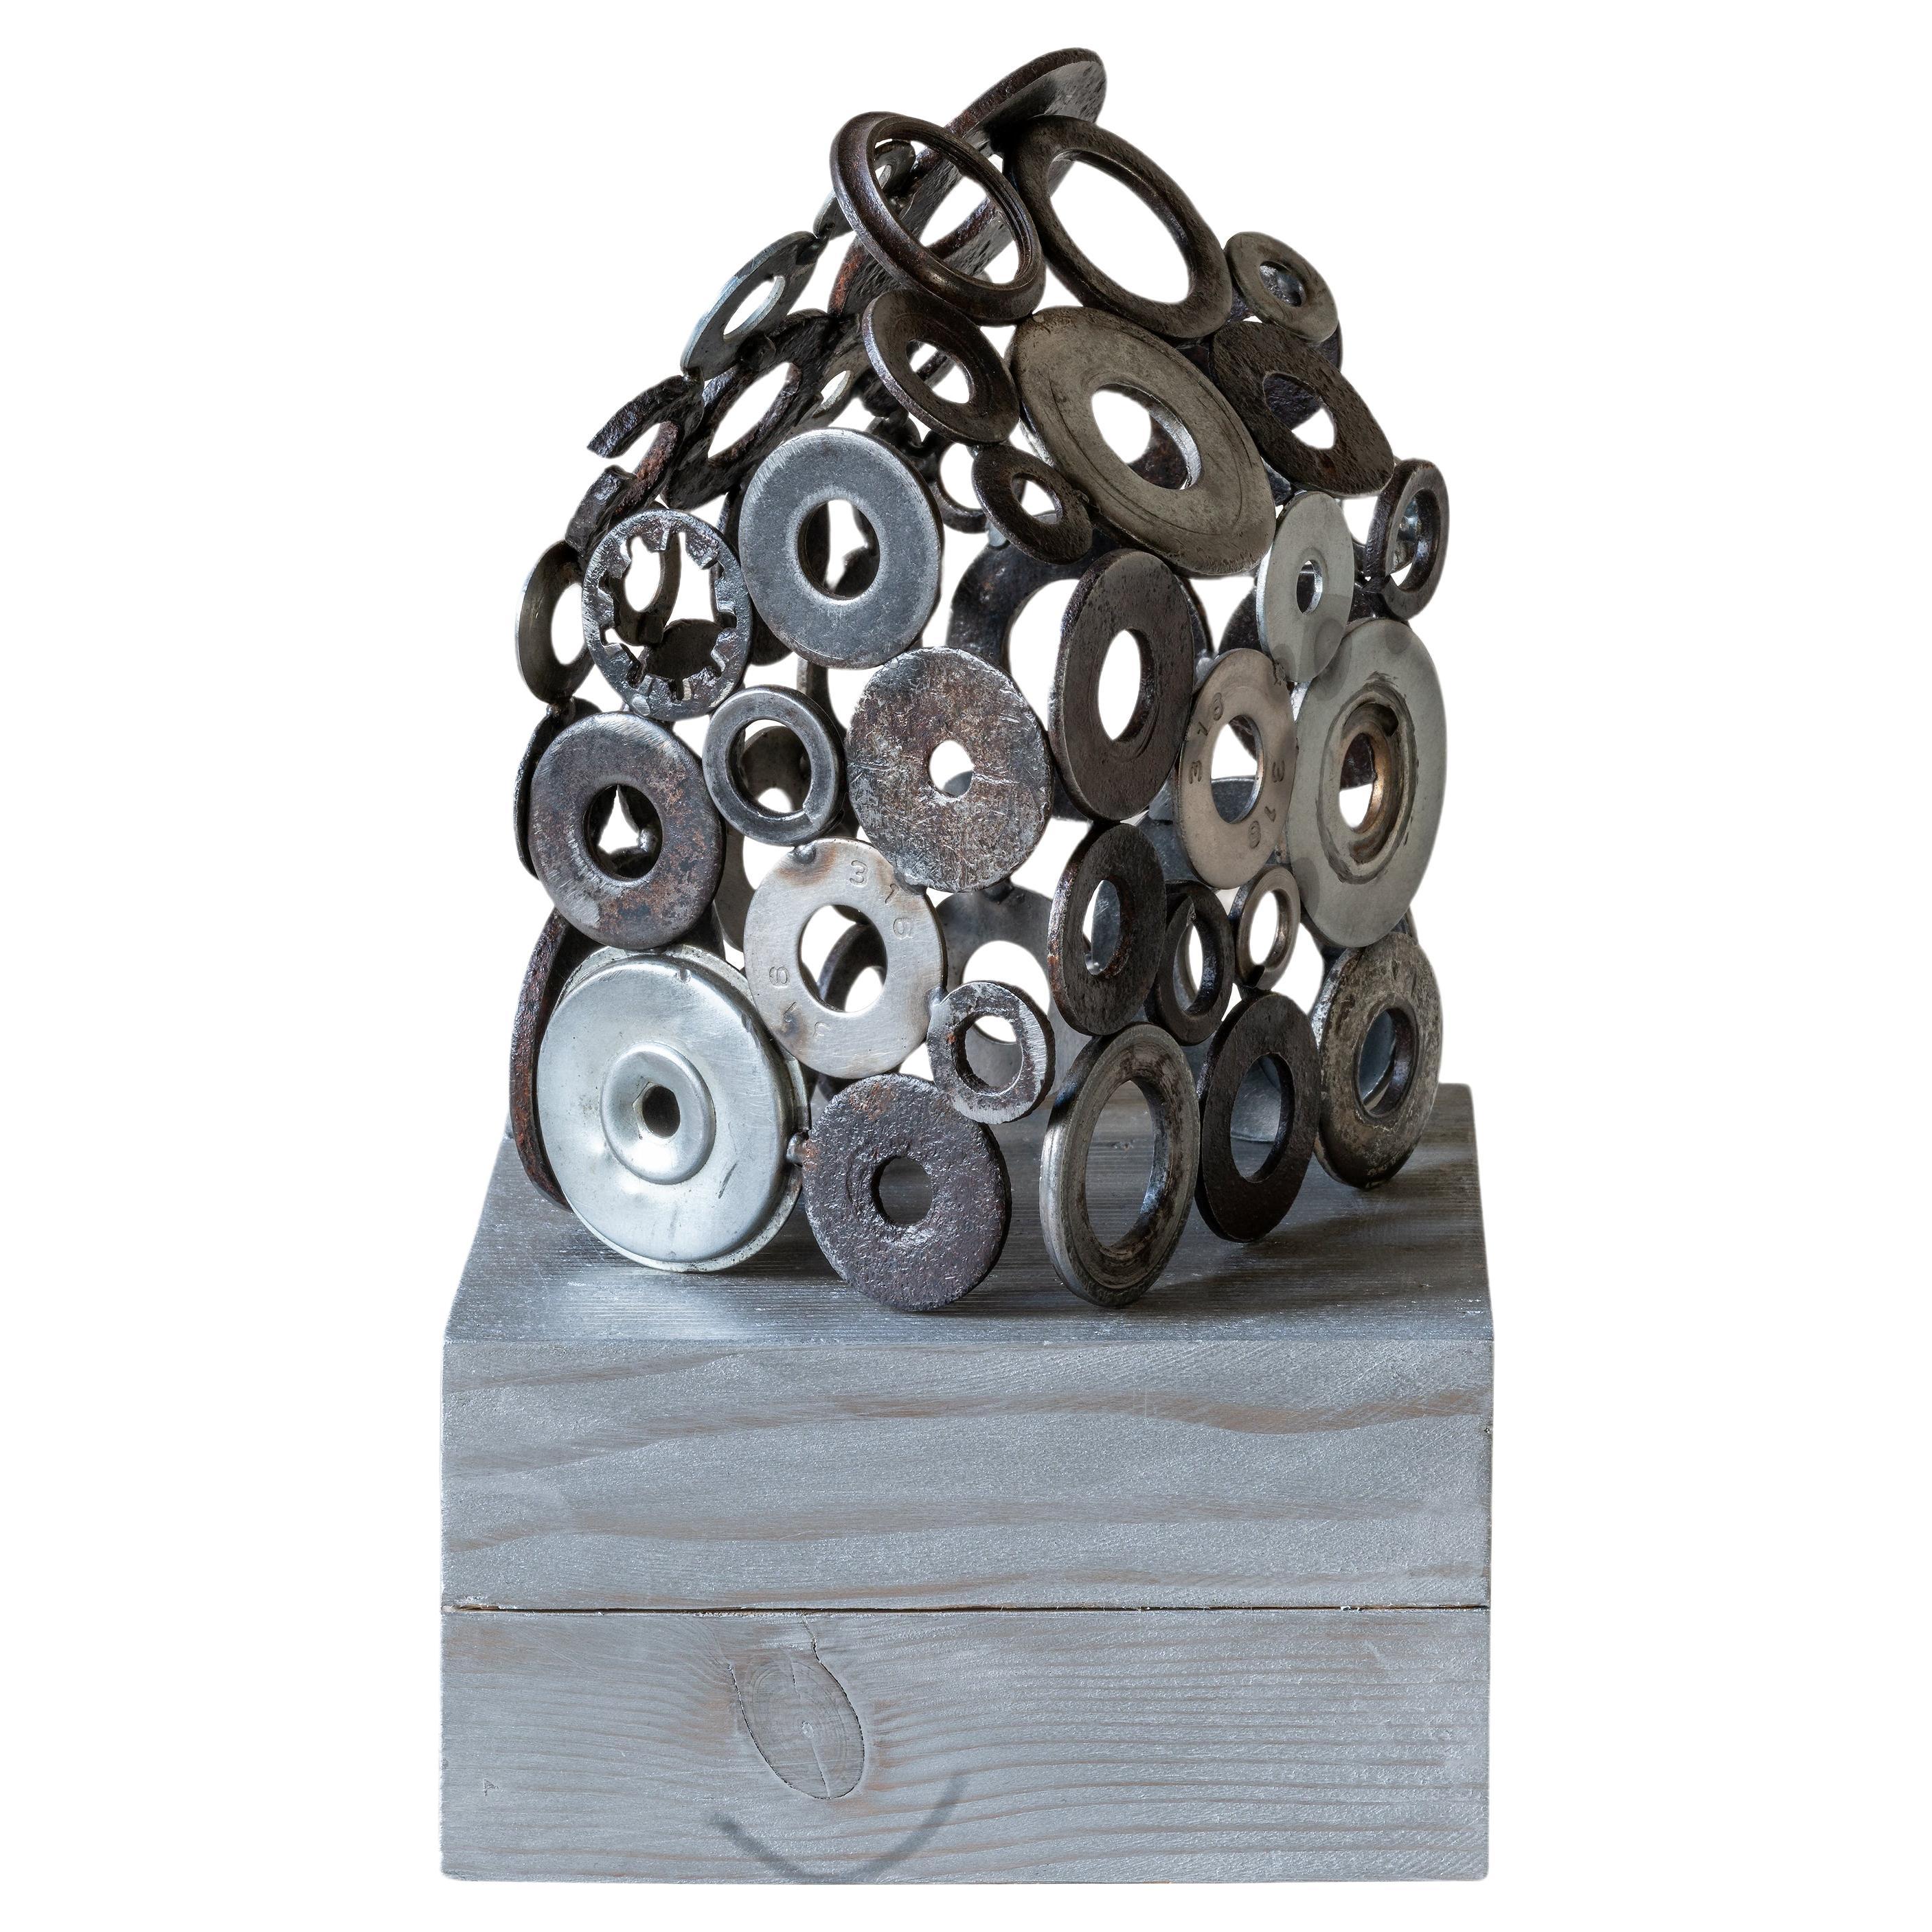 Jim Rose - Construct No. 02, Salvaged Steel and Aluminum Industrial Objects For Sale